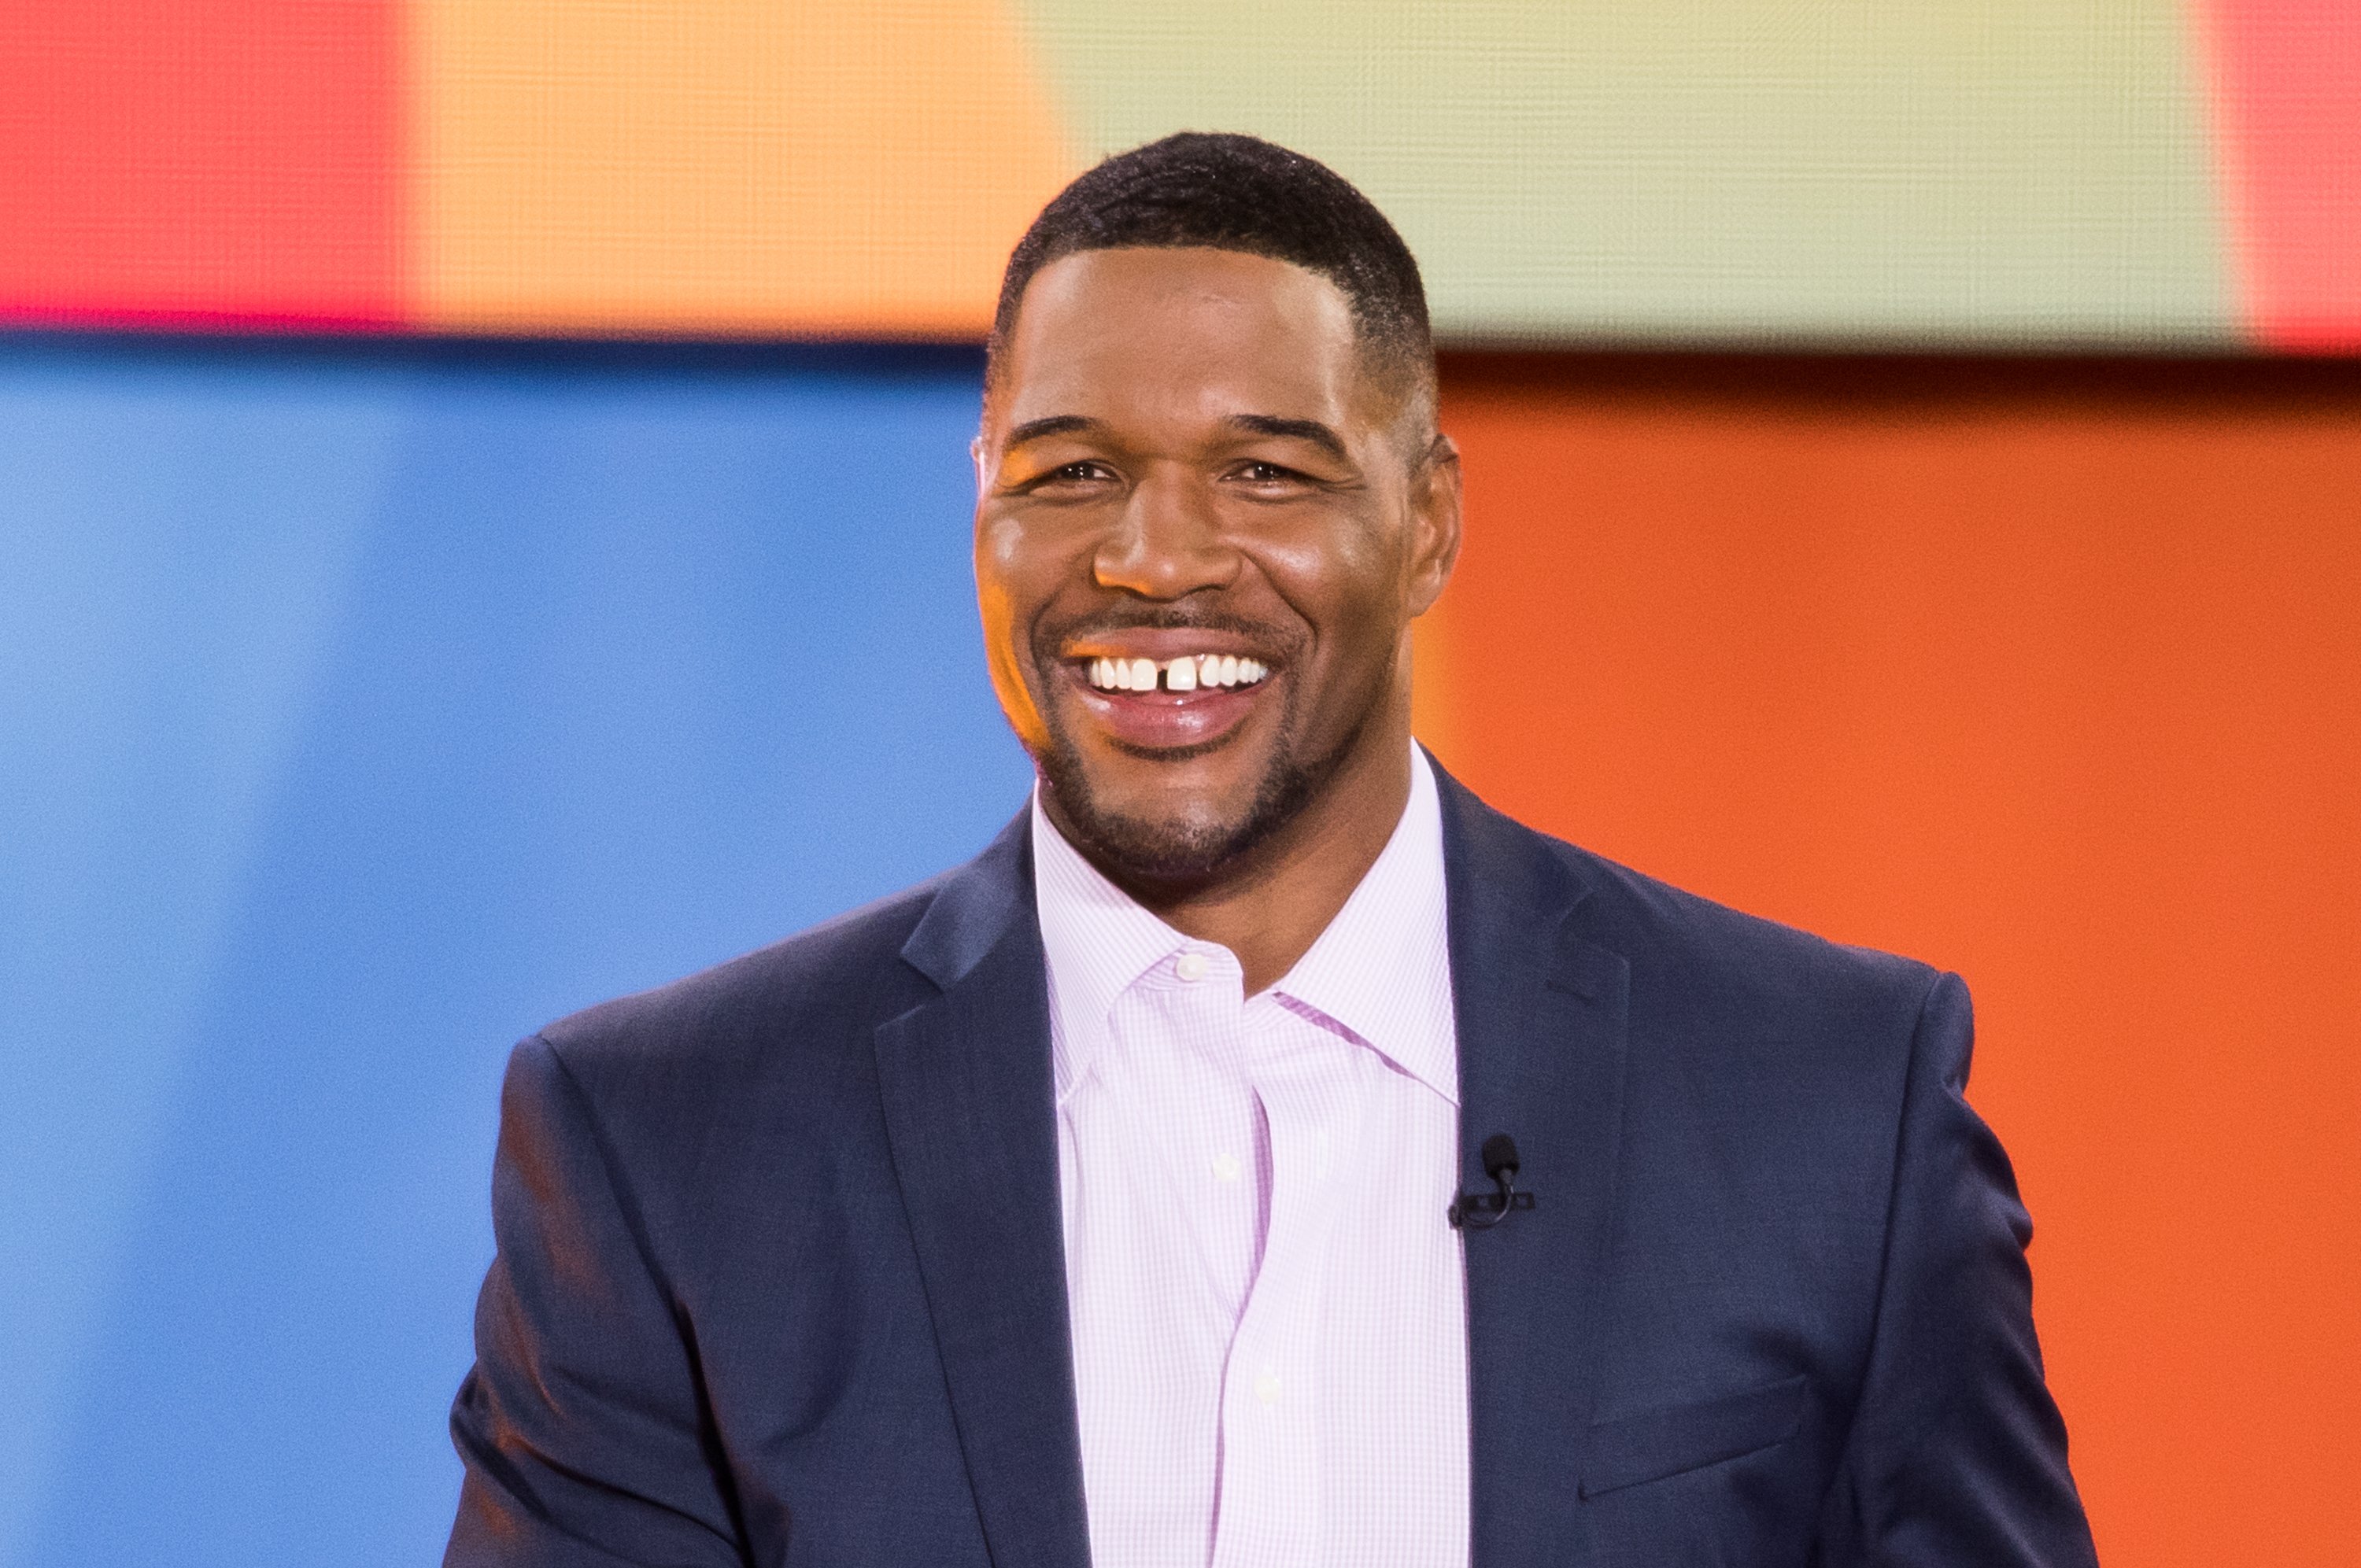 Michael Strahan on the set of "Good Morning America" at Rumsey Playfield, Central Park on July 6, 2018. | Source: Getty Images